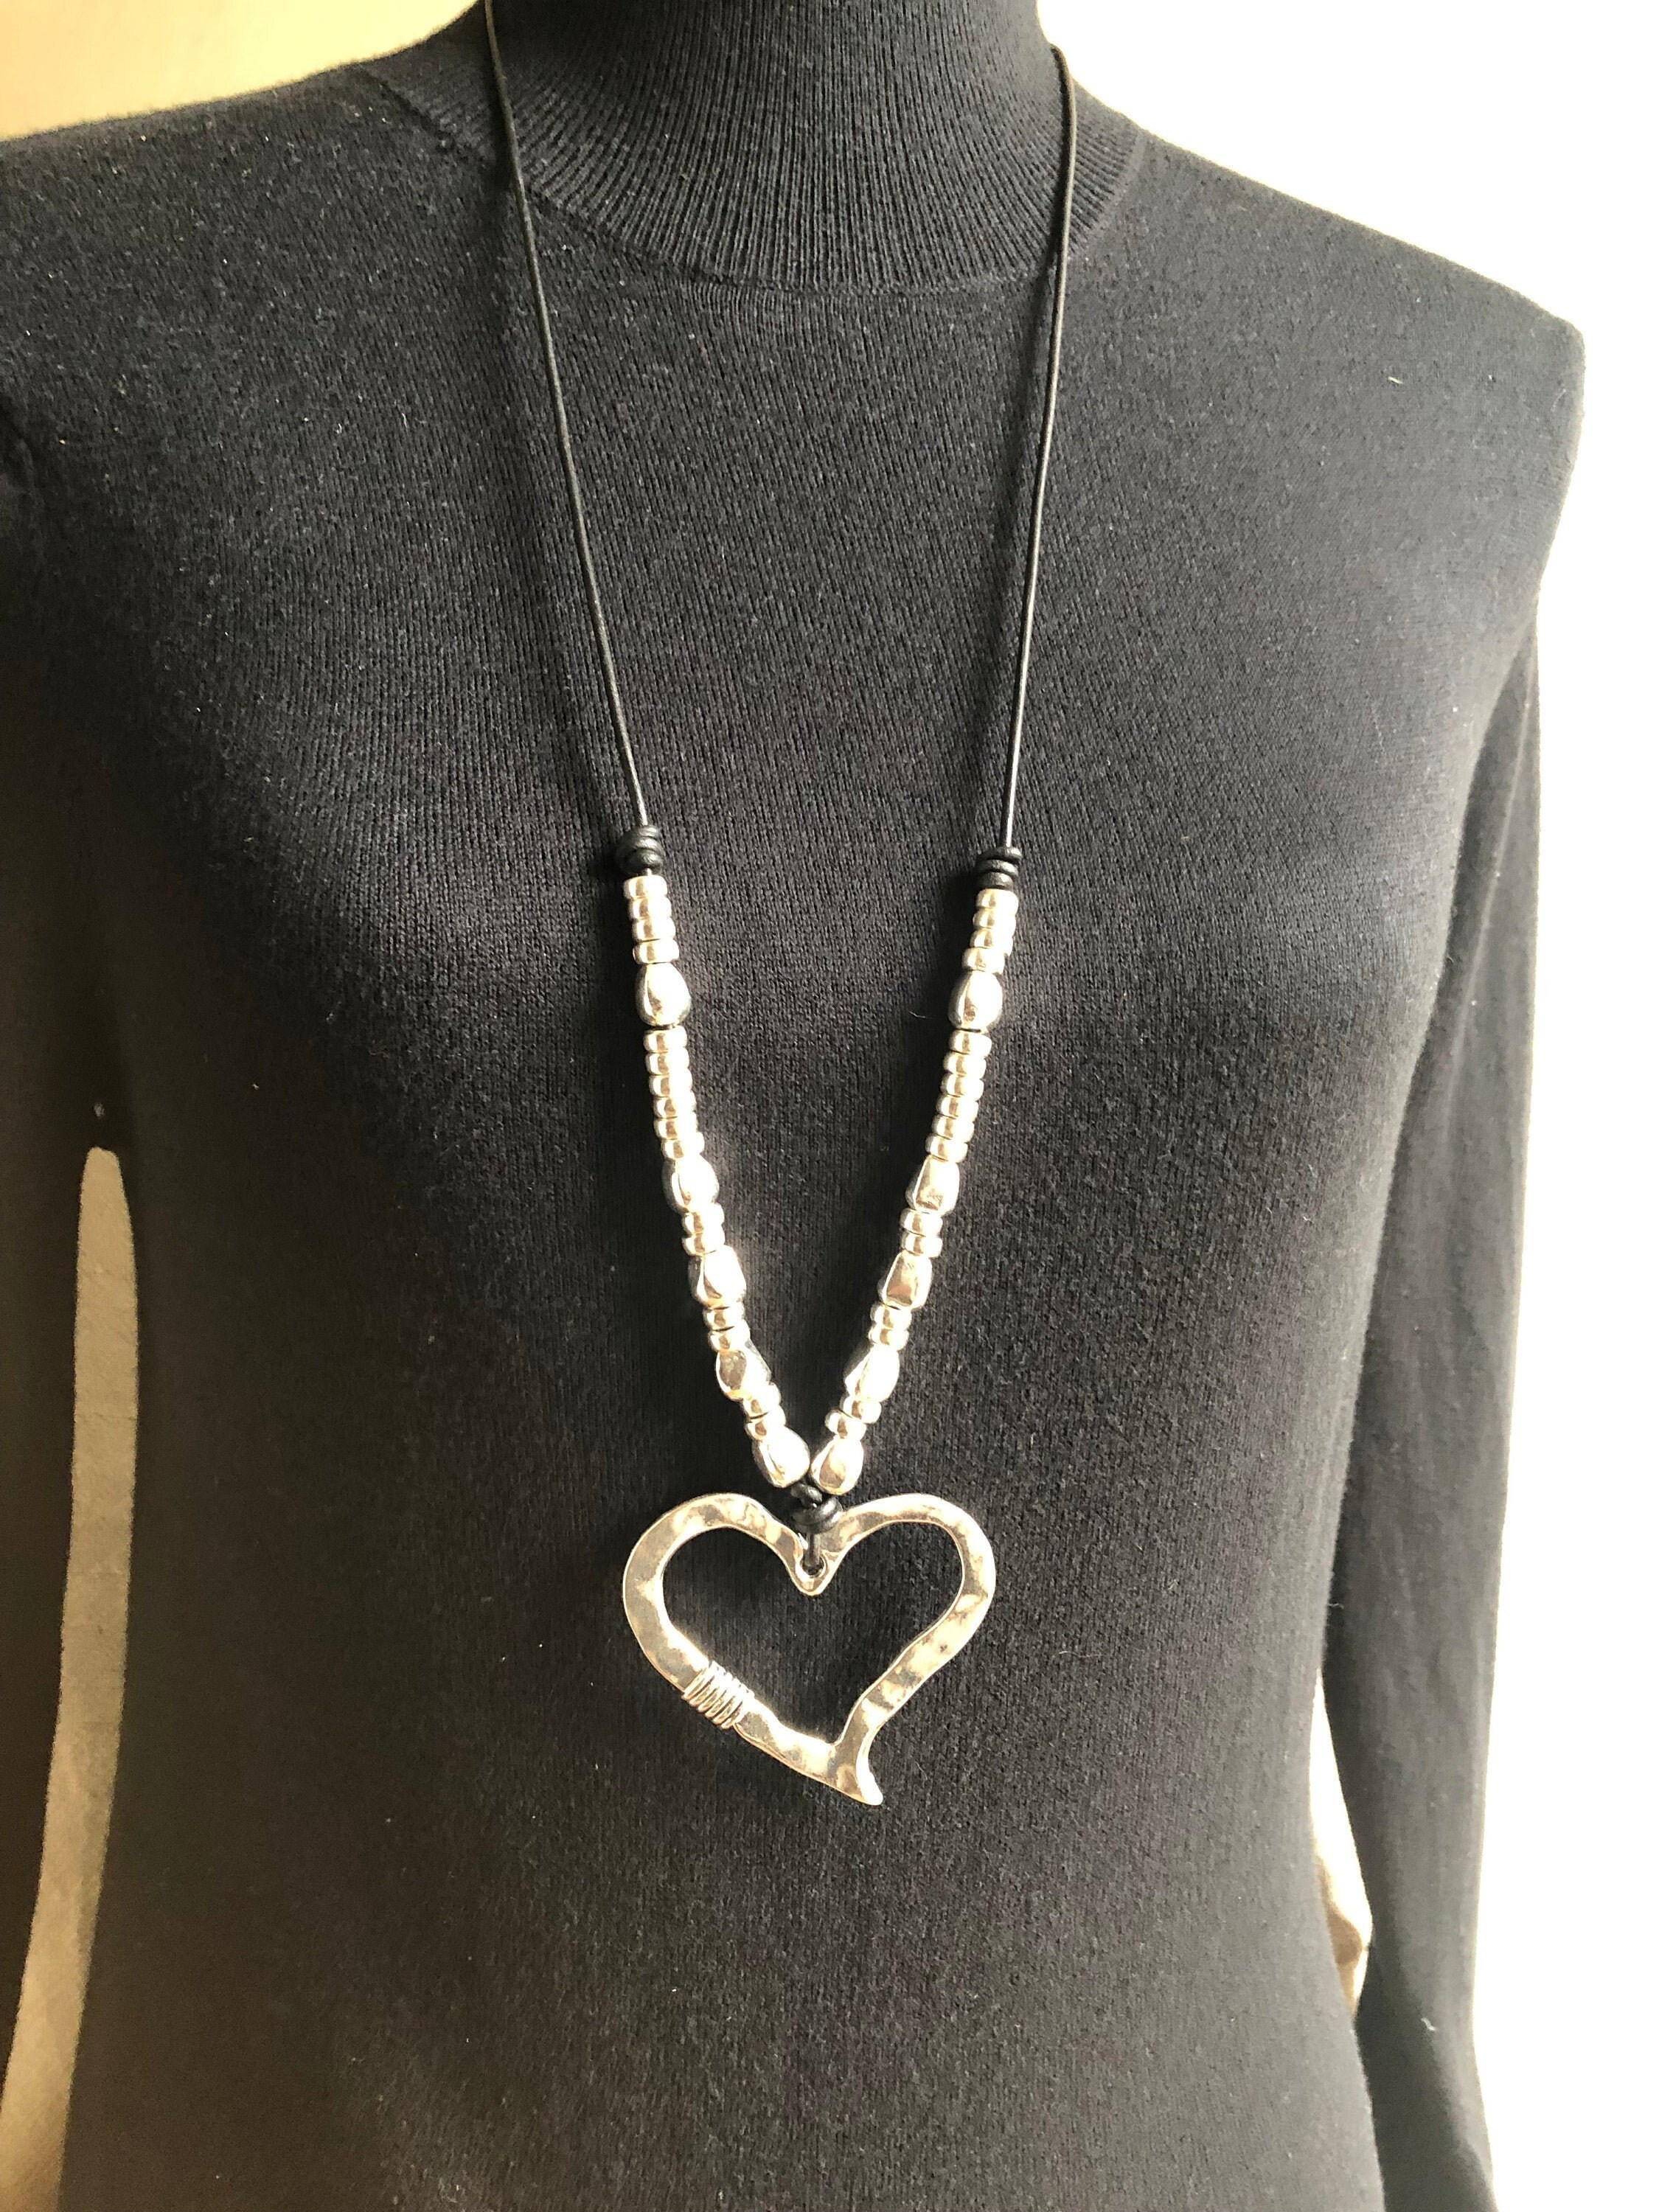 Large Heart Silver Heart Long Statement Necklace Heart | Etsy